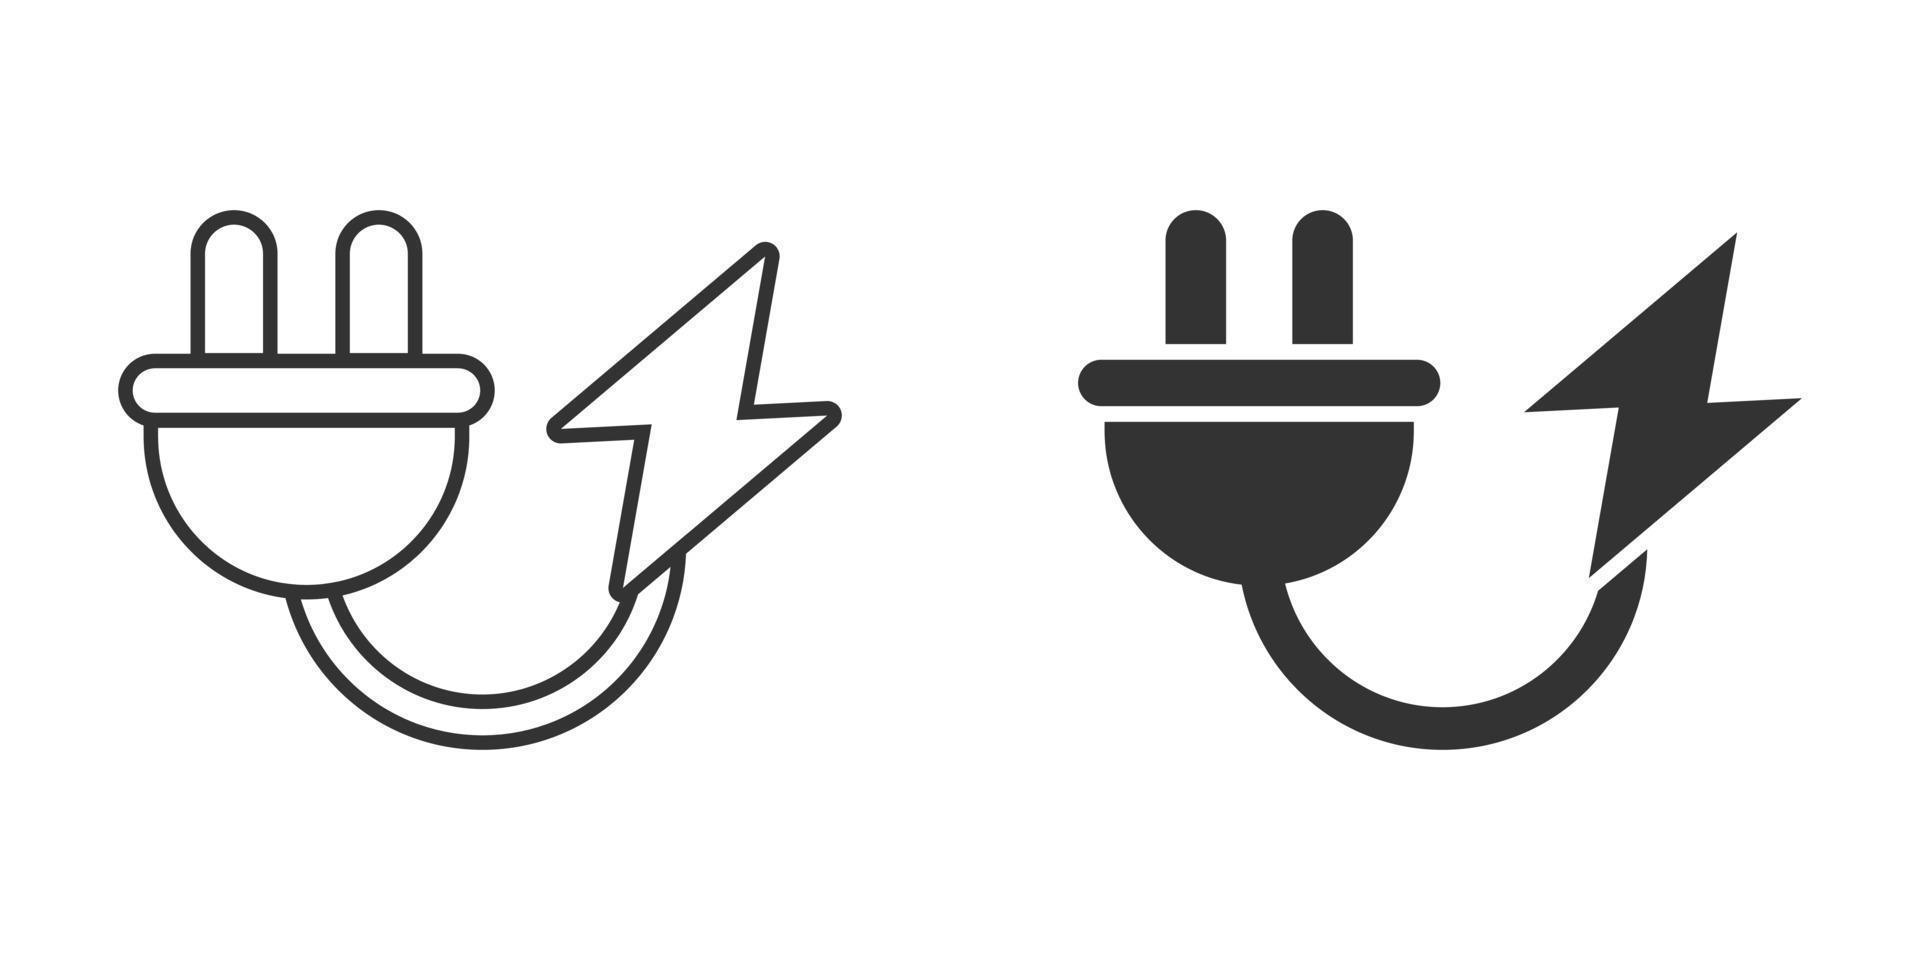 Electric plug icon in flat style. Power adapter vector illustration on white isolated background. Electrician sign business concept.